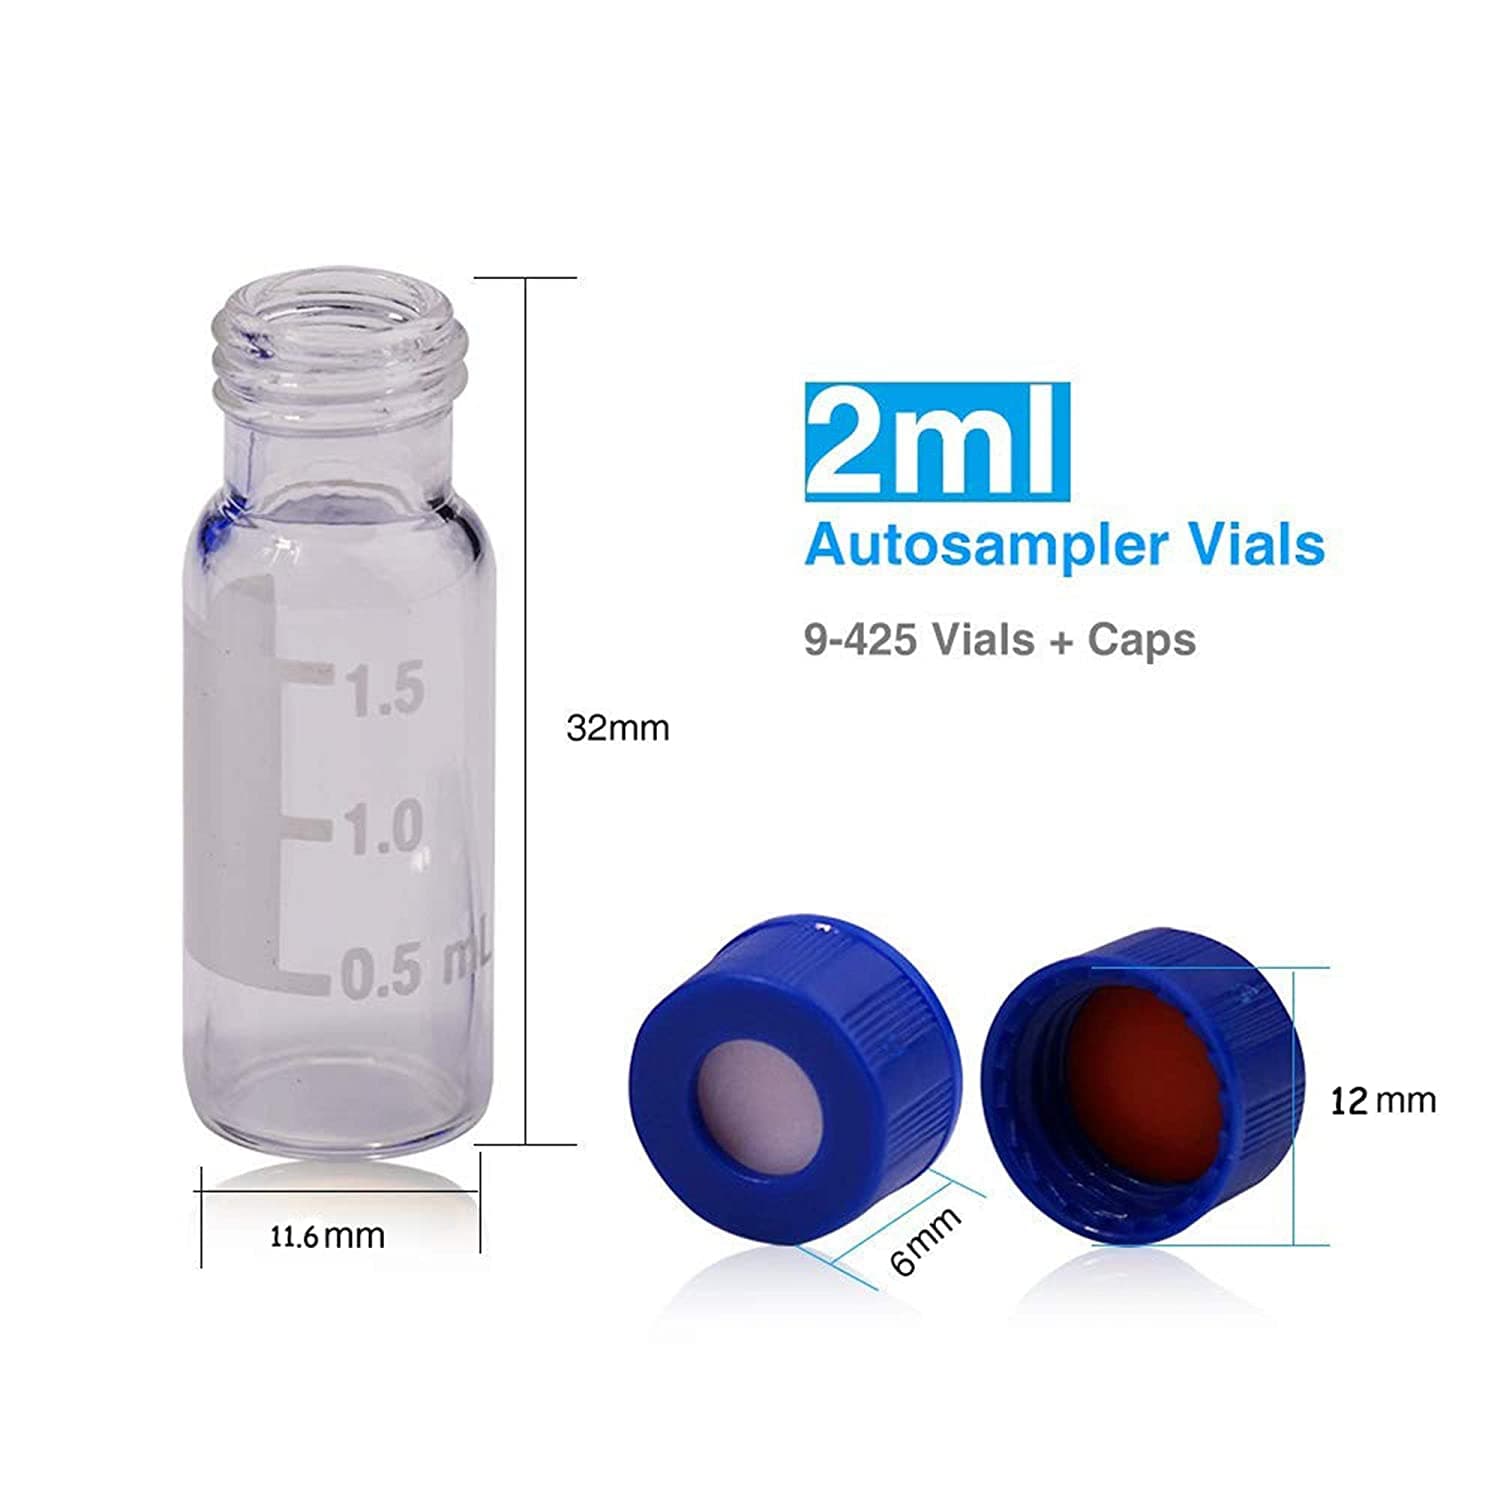 1.5ml clear hplc glass vials price Alibaba